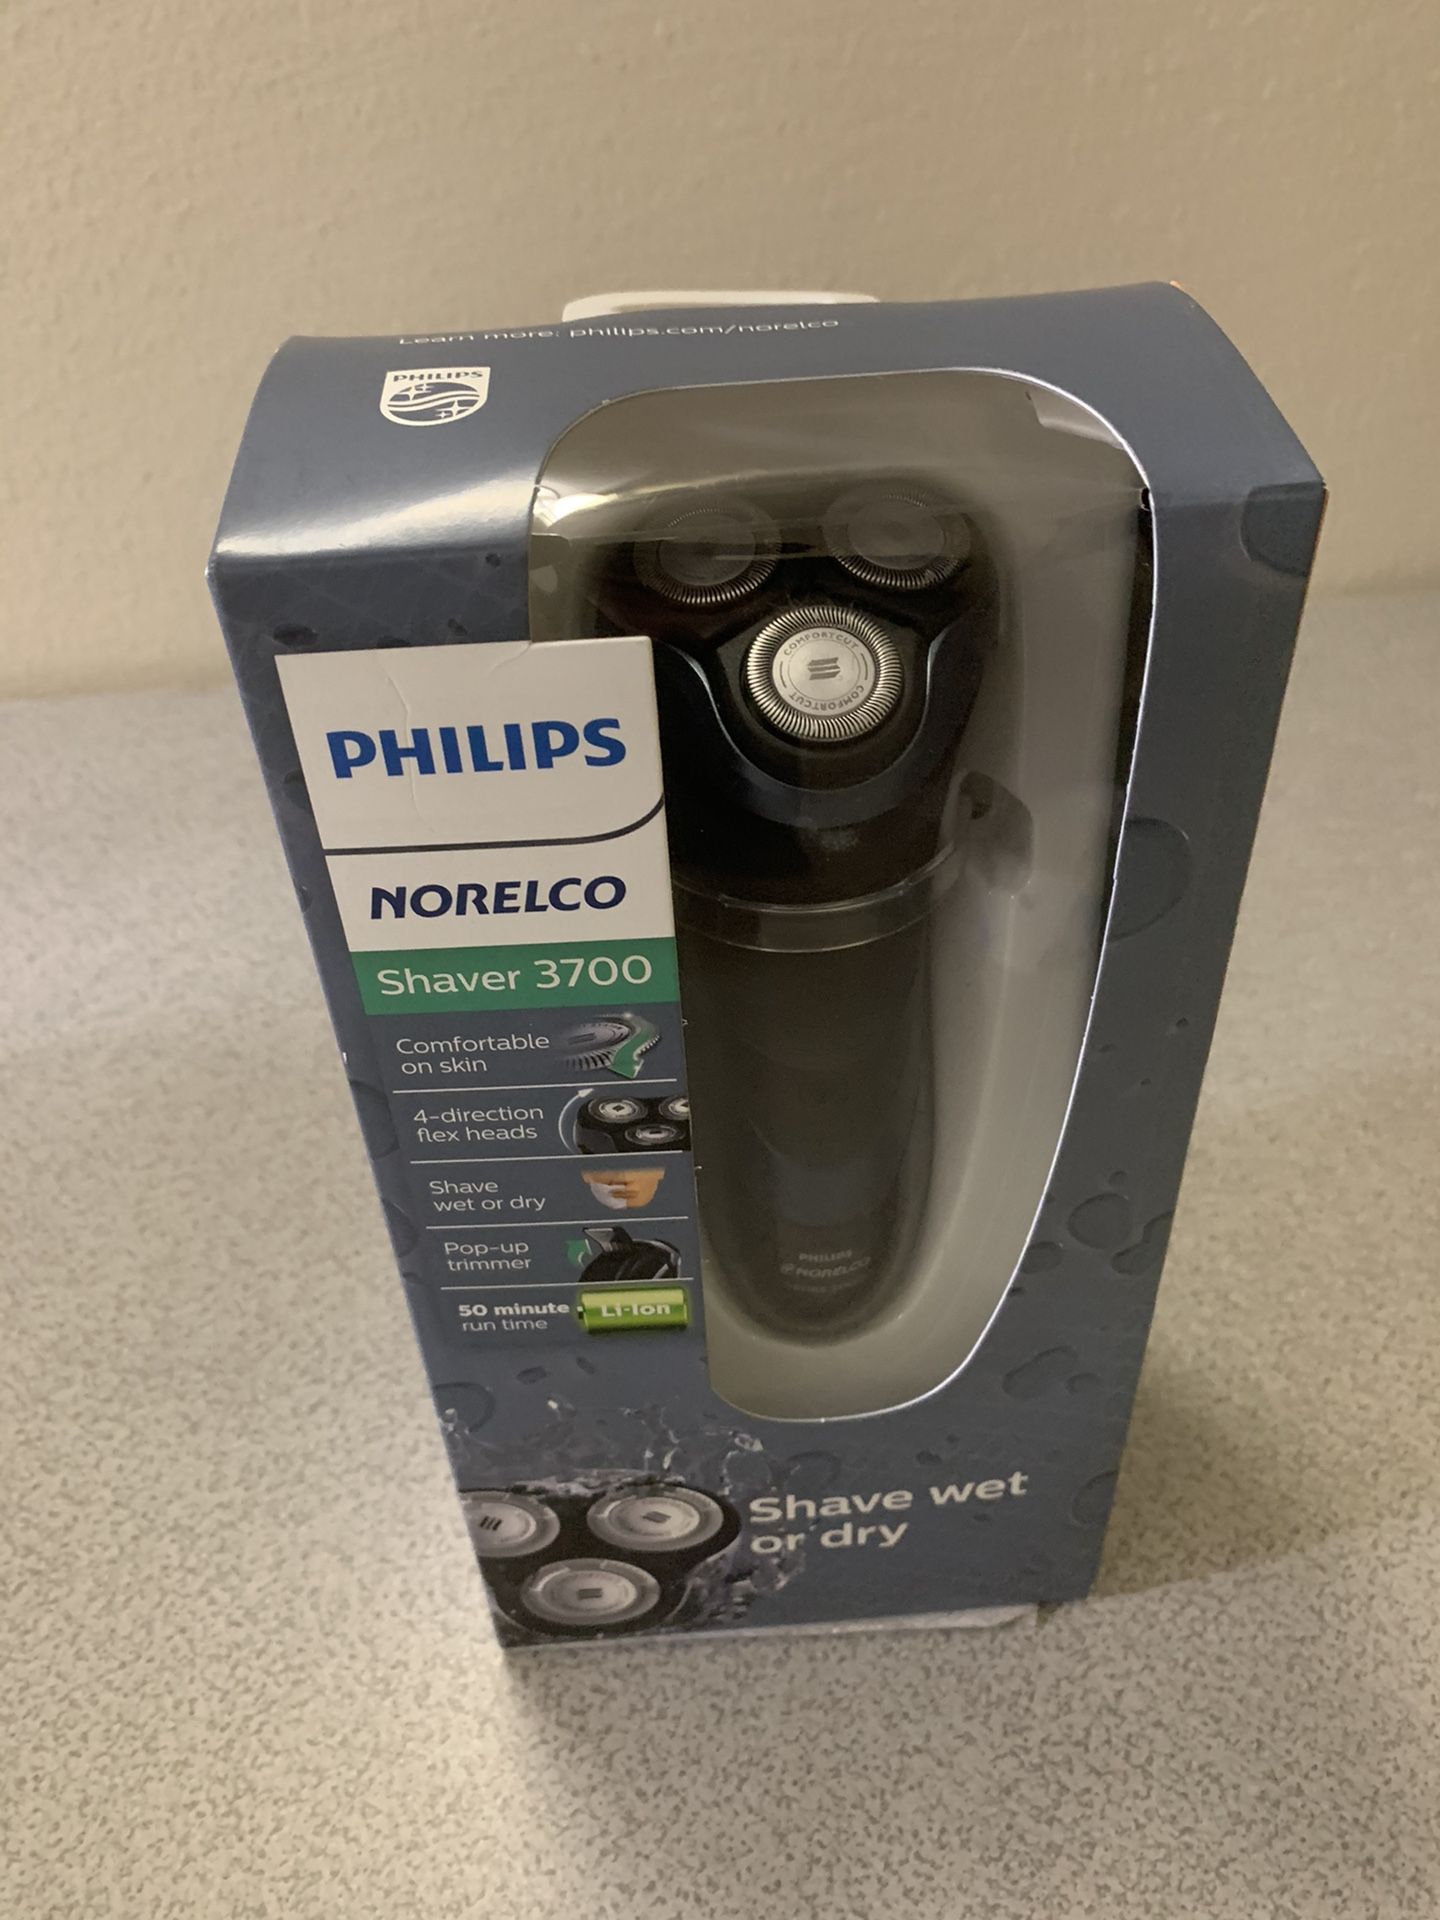 Philips Norelco Electric Shaver 3700 Series 3000 ComfortCut Shower Proof Shaver